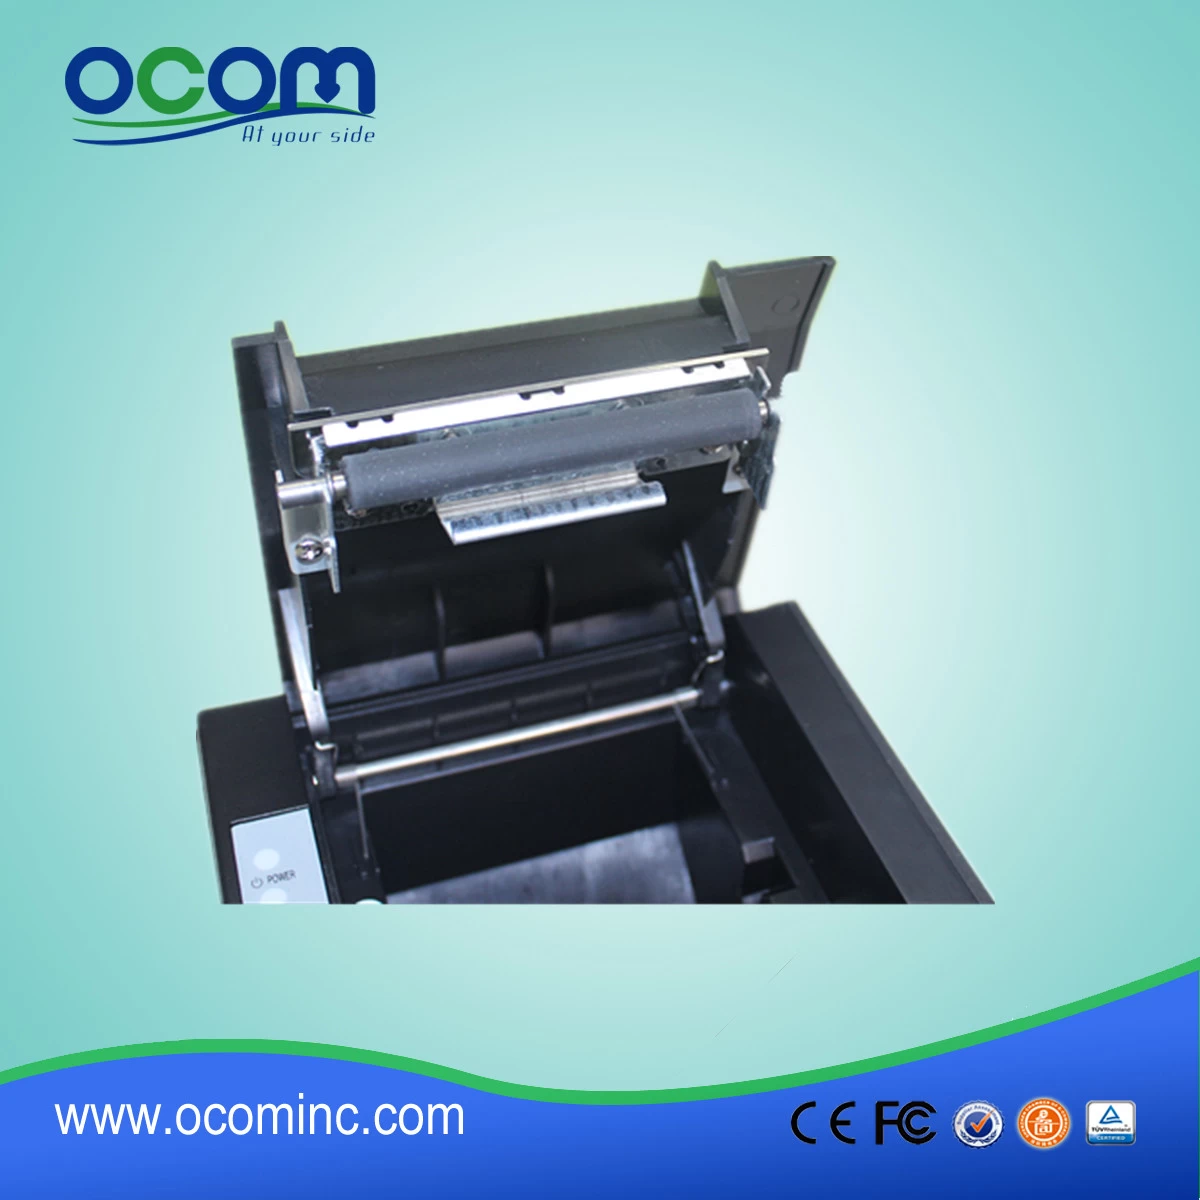 (OCPP-88A) 80mm High Speed Bluetooth Thermal Printer With Auto Cutter